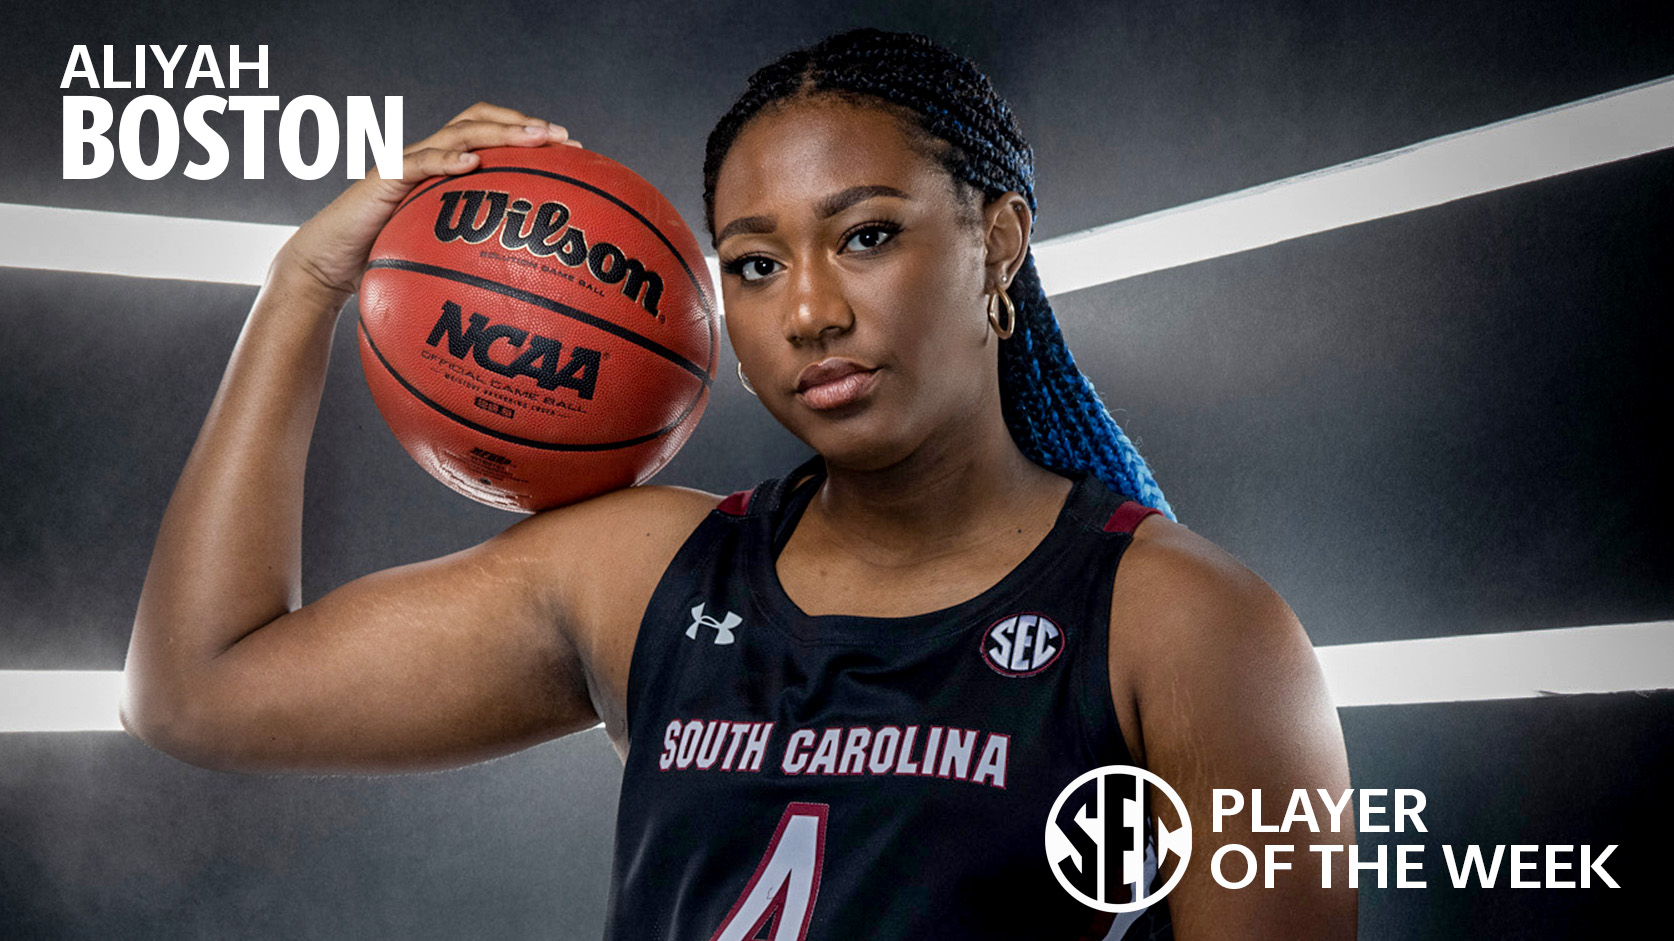 Boston Named SEC Player of the Week